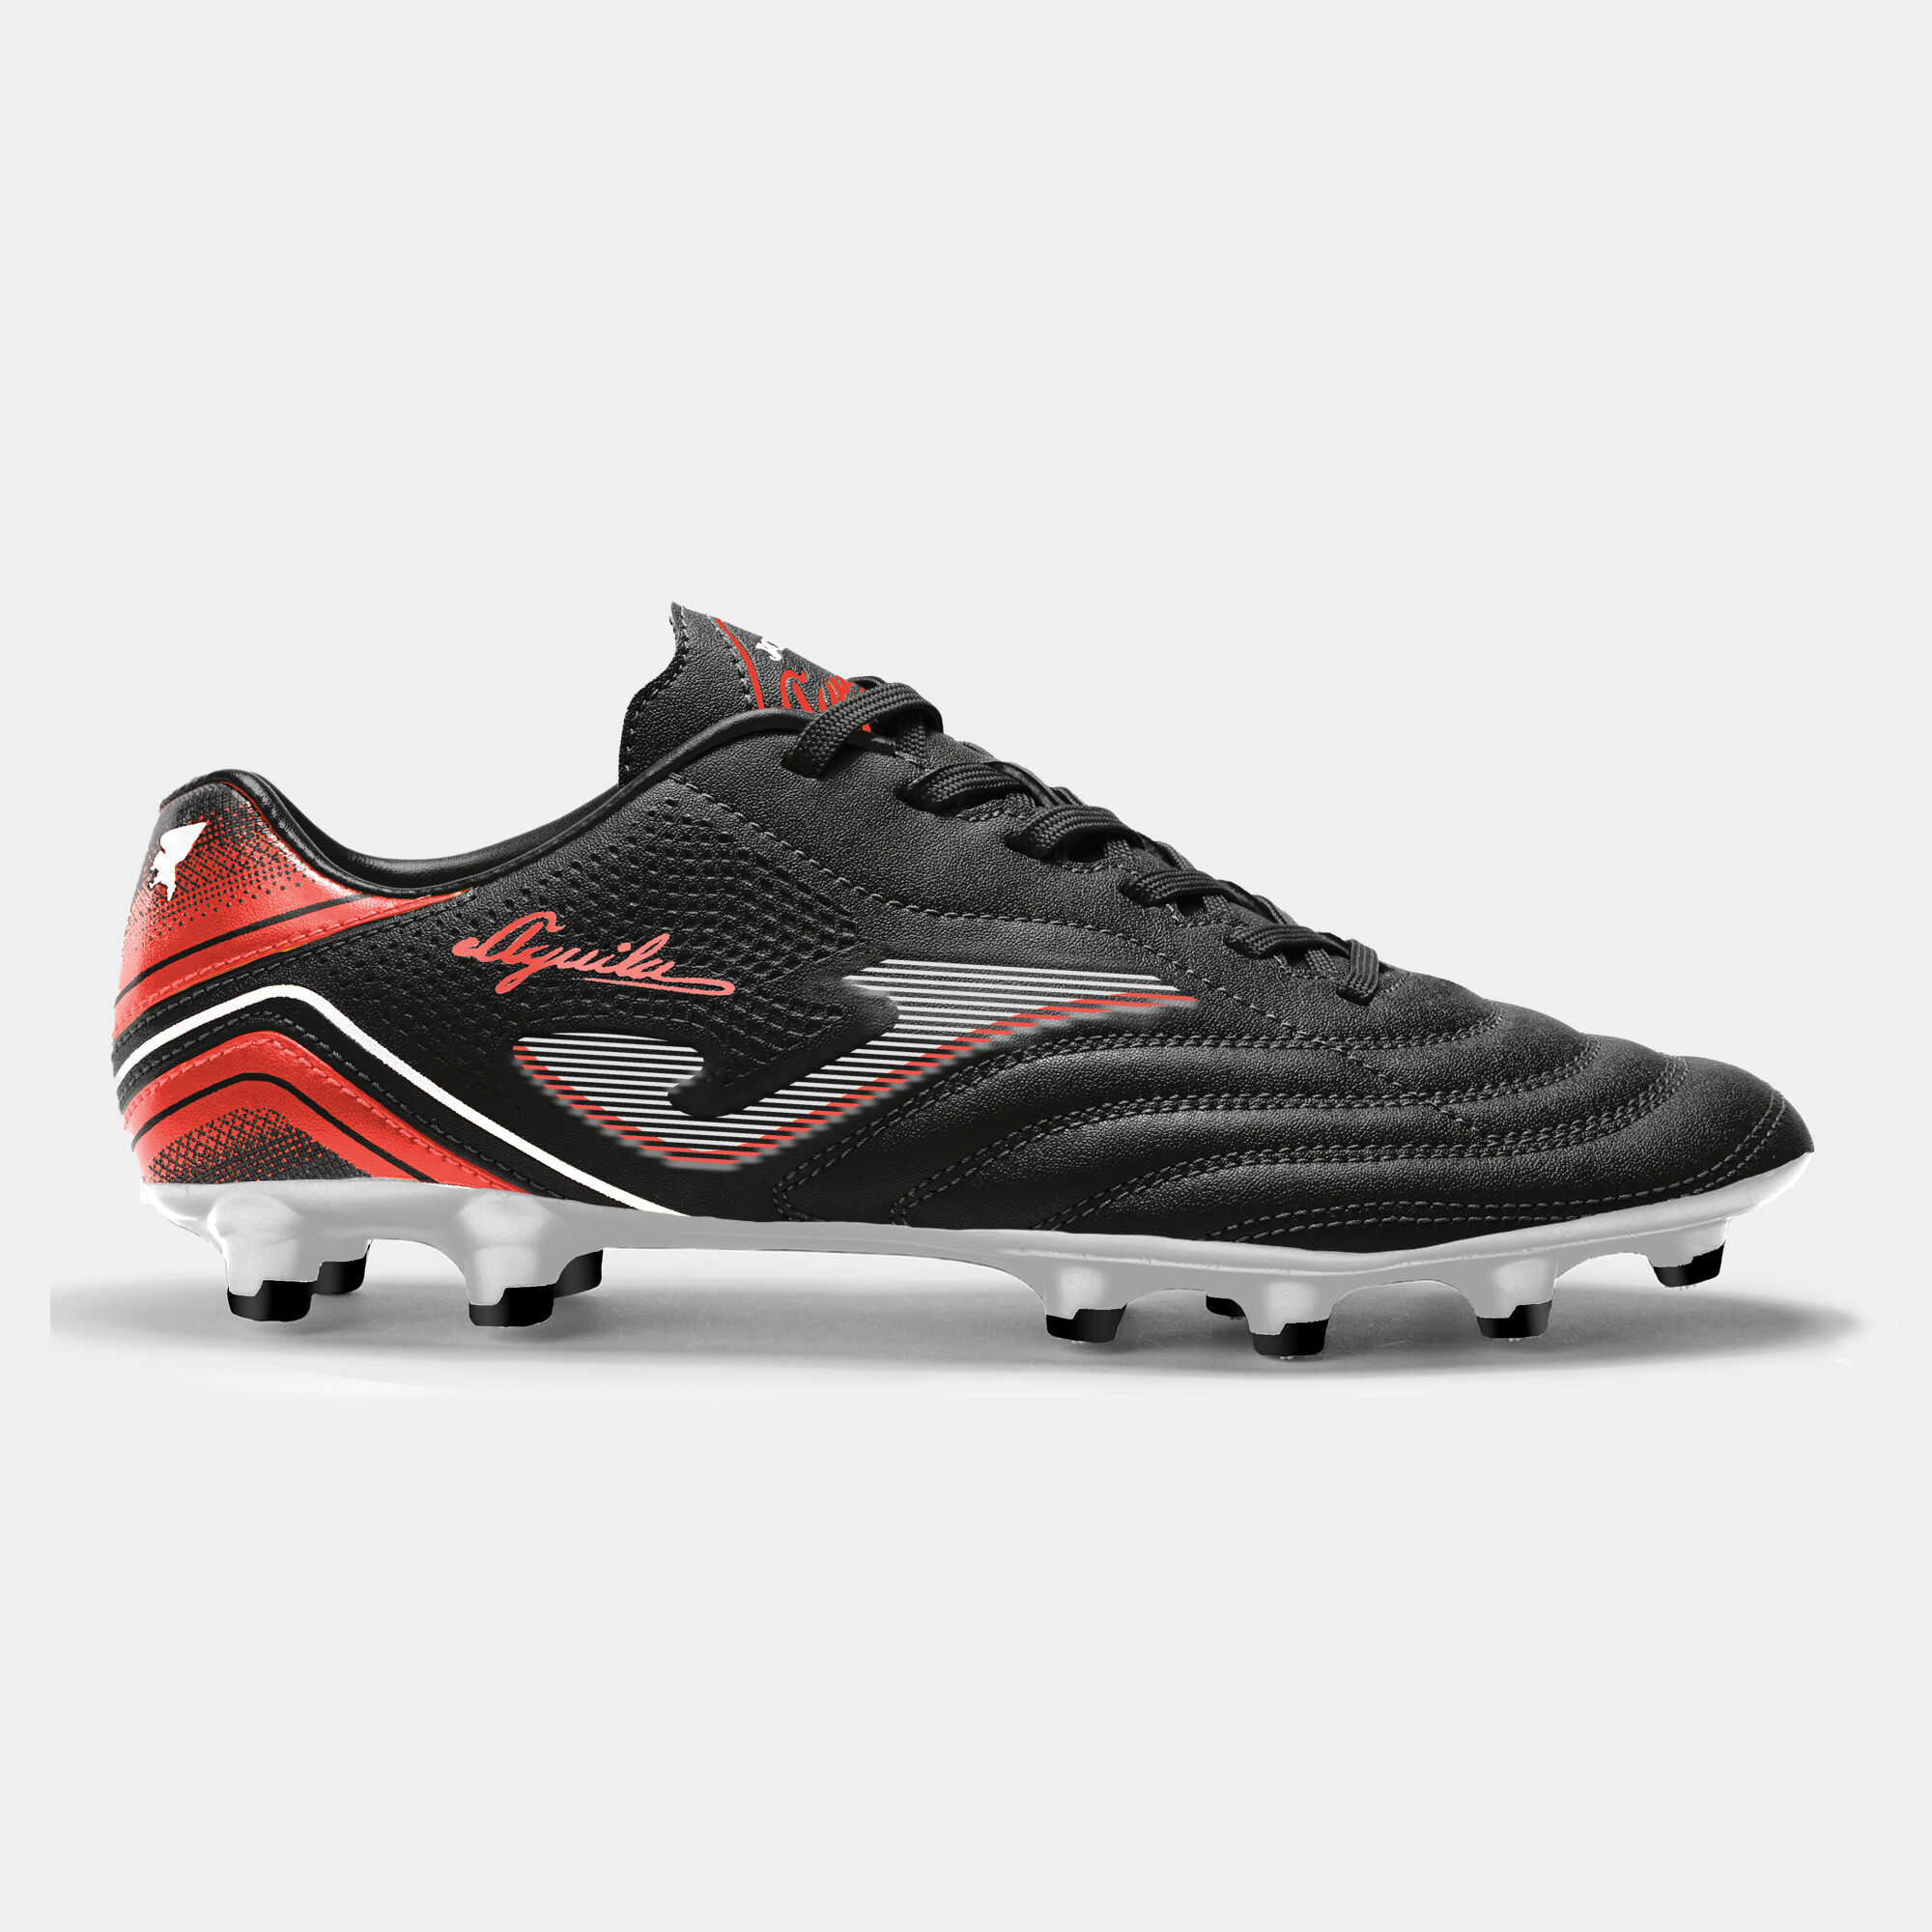 FOOTBALL BOOTS AGUILA 22 ARTIFICIAL GRASS BLACK RED